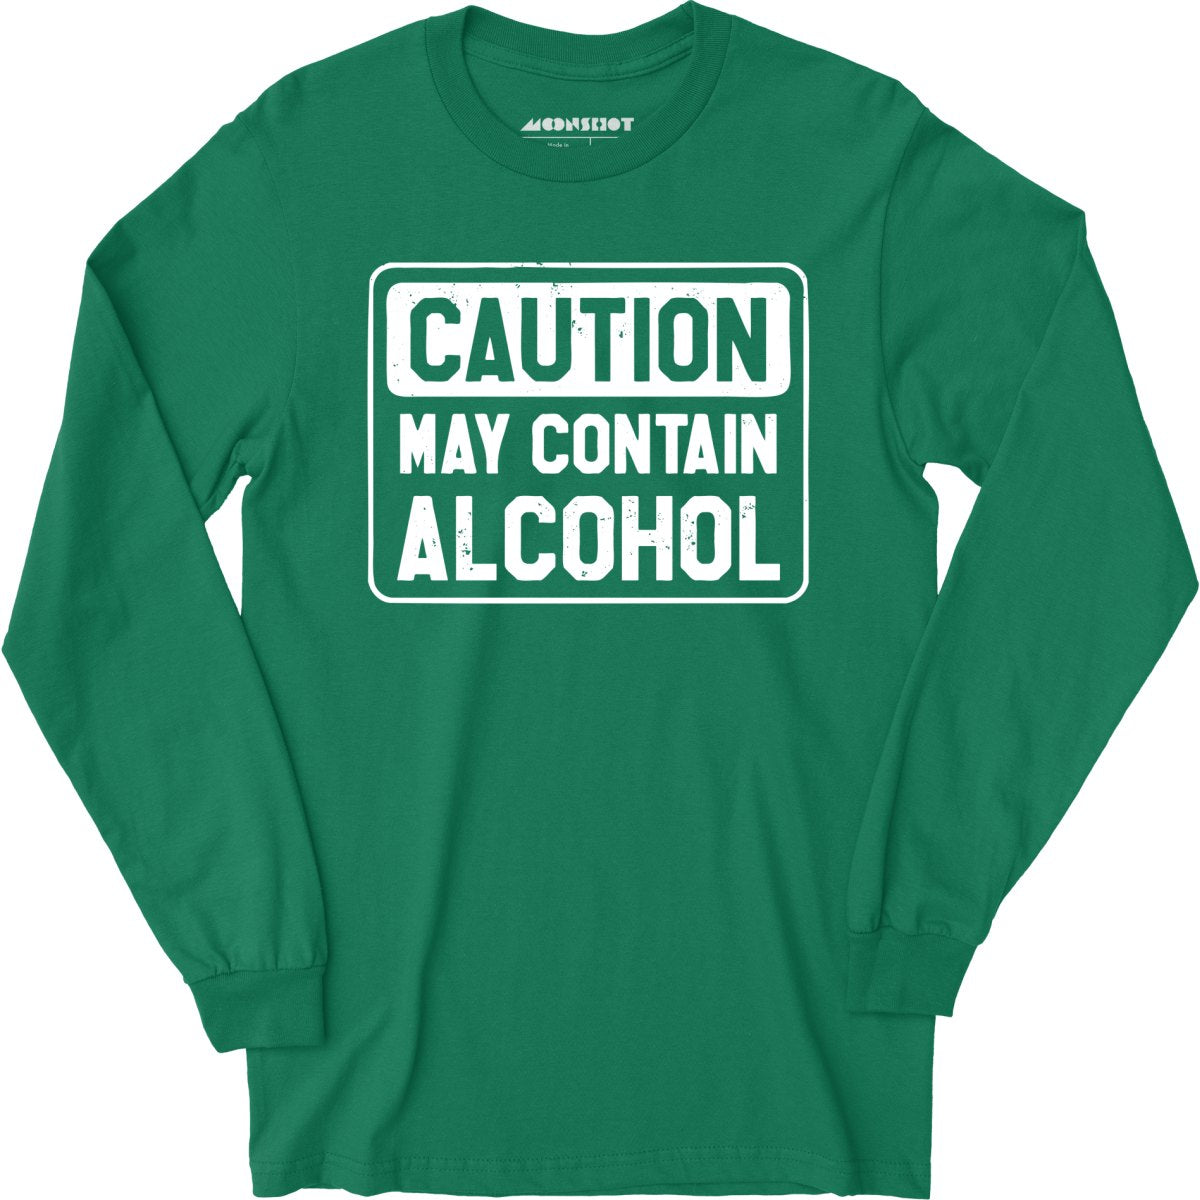 Caution May Contain Alcohol - Long Sleeve T-Shirt